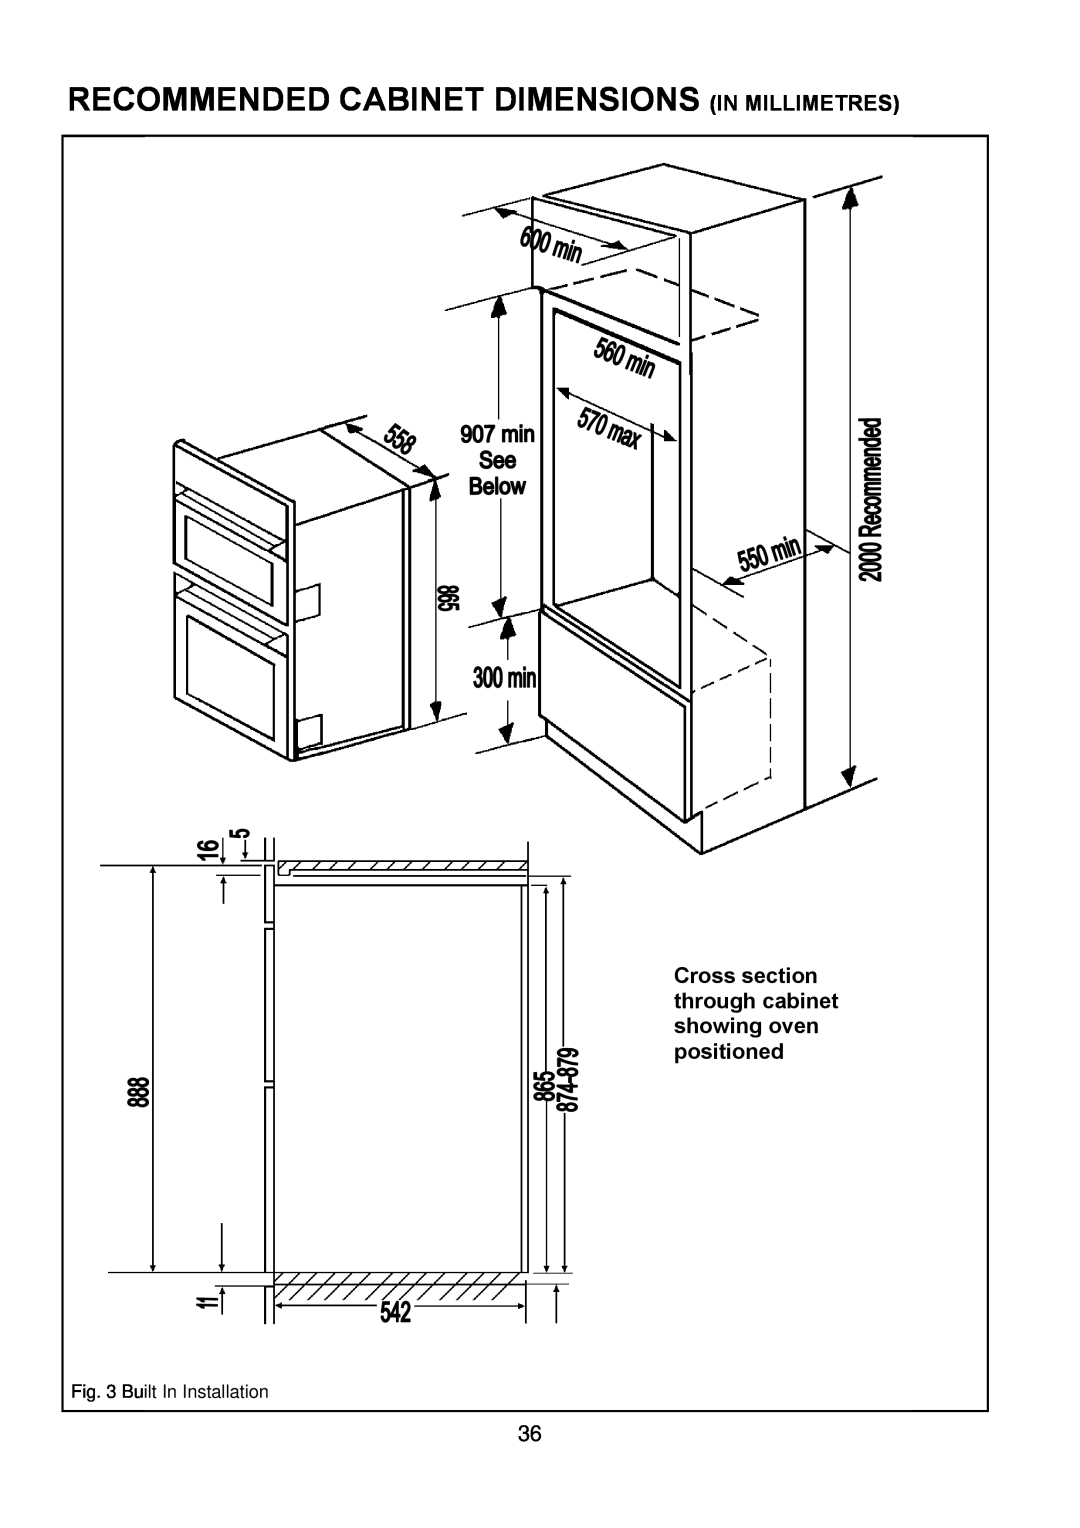 Zanussi ZOD 890 manual Recommended Cabinet Dimensions In Millimetres, Cross section through cabinet showing oven positioned 